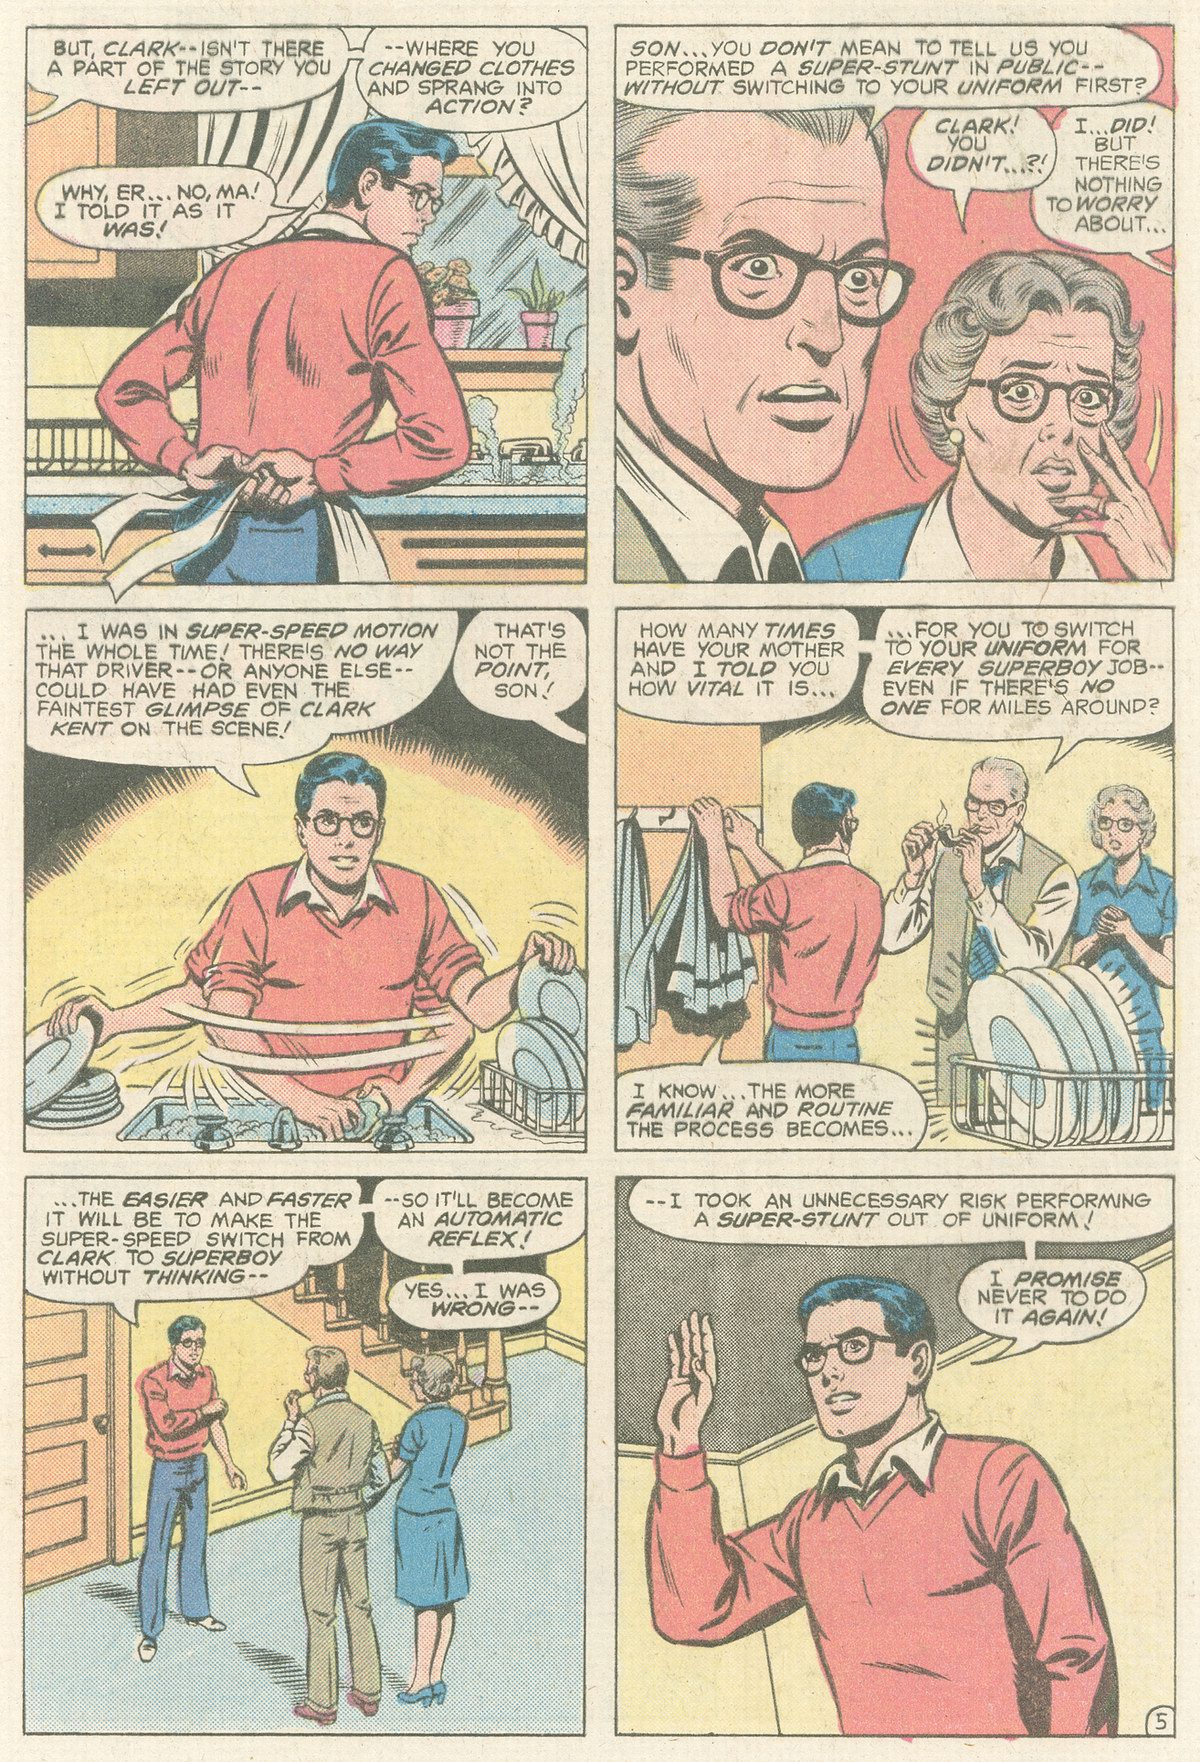 The New Adventures of Superboy 12 Page 5